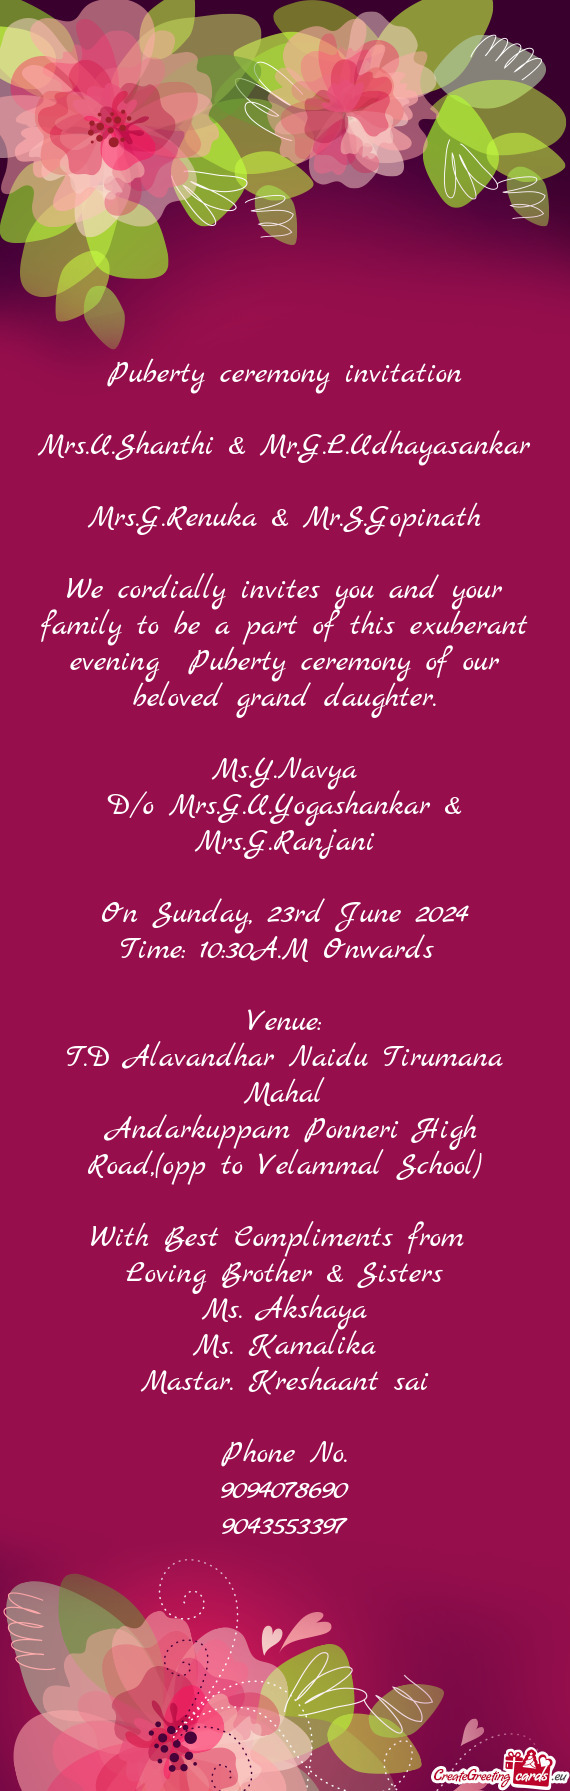 We cordially invites you and your family to be a part of this exuberant evening Puberty ceremony of